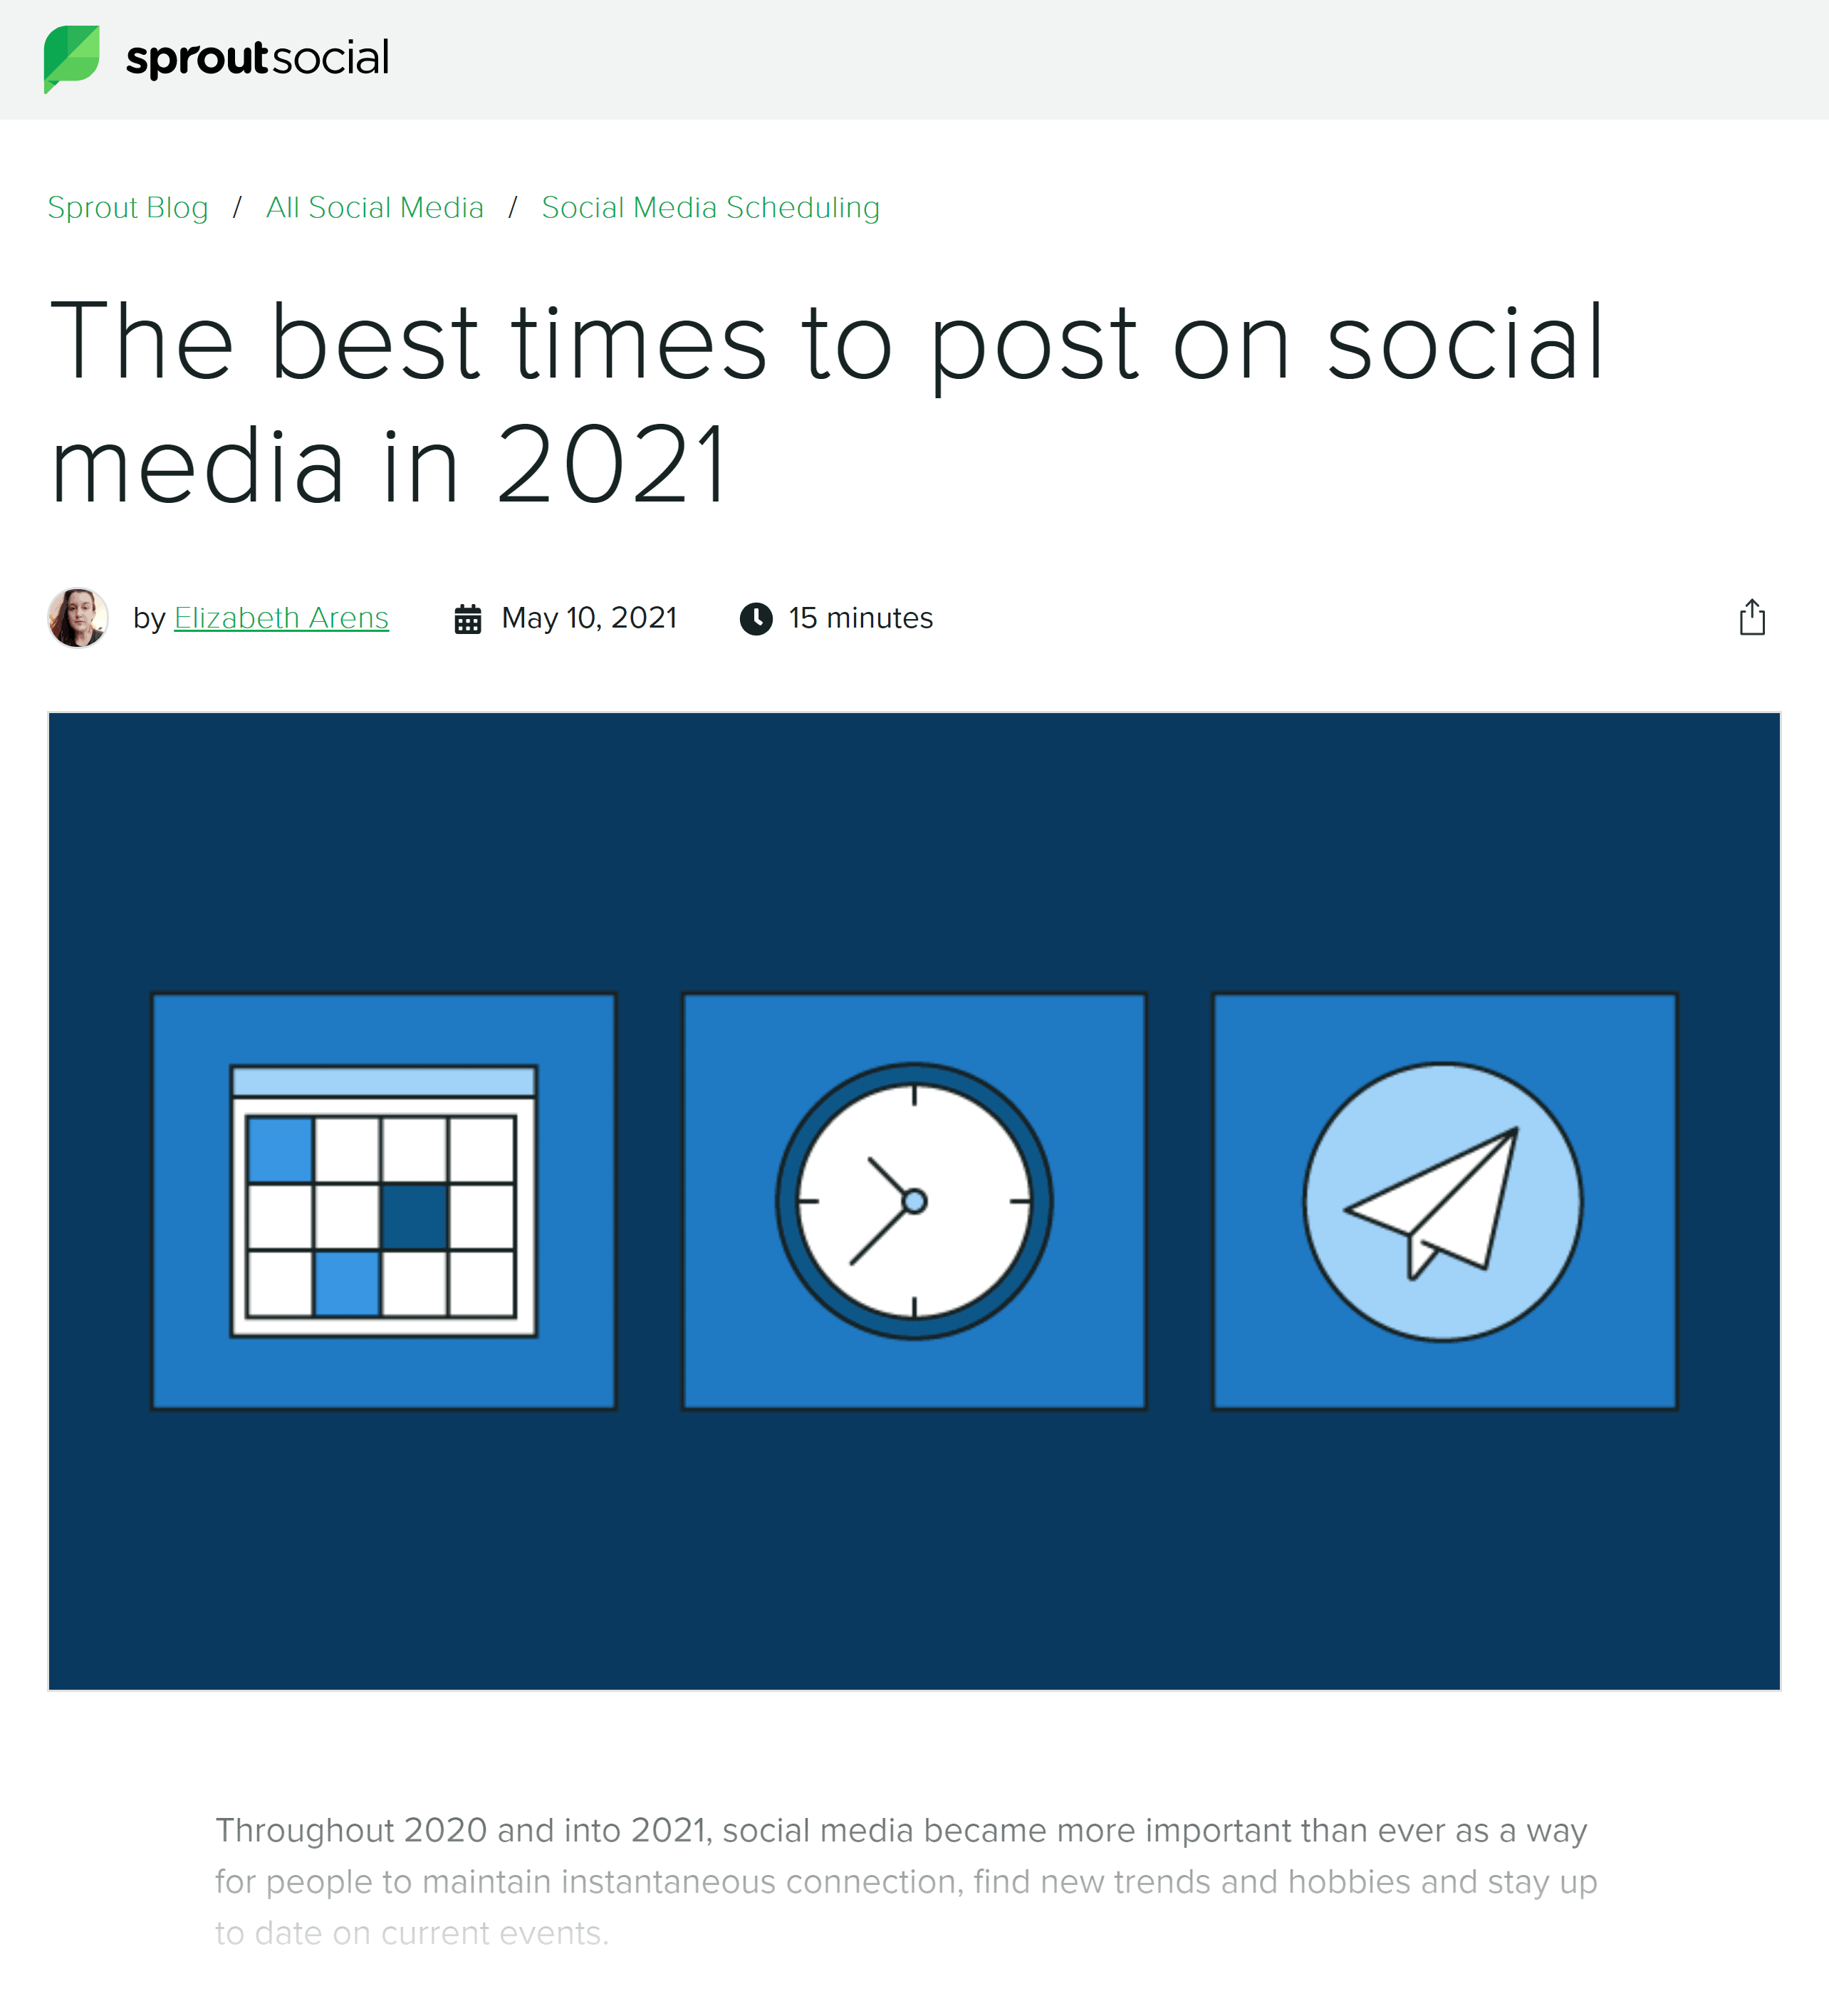 SproutSocial – Best times to post on social media